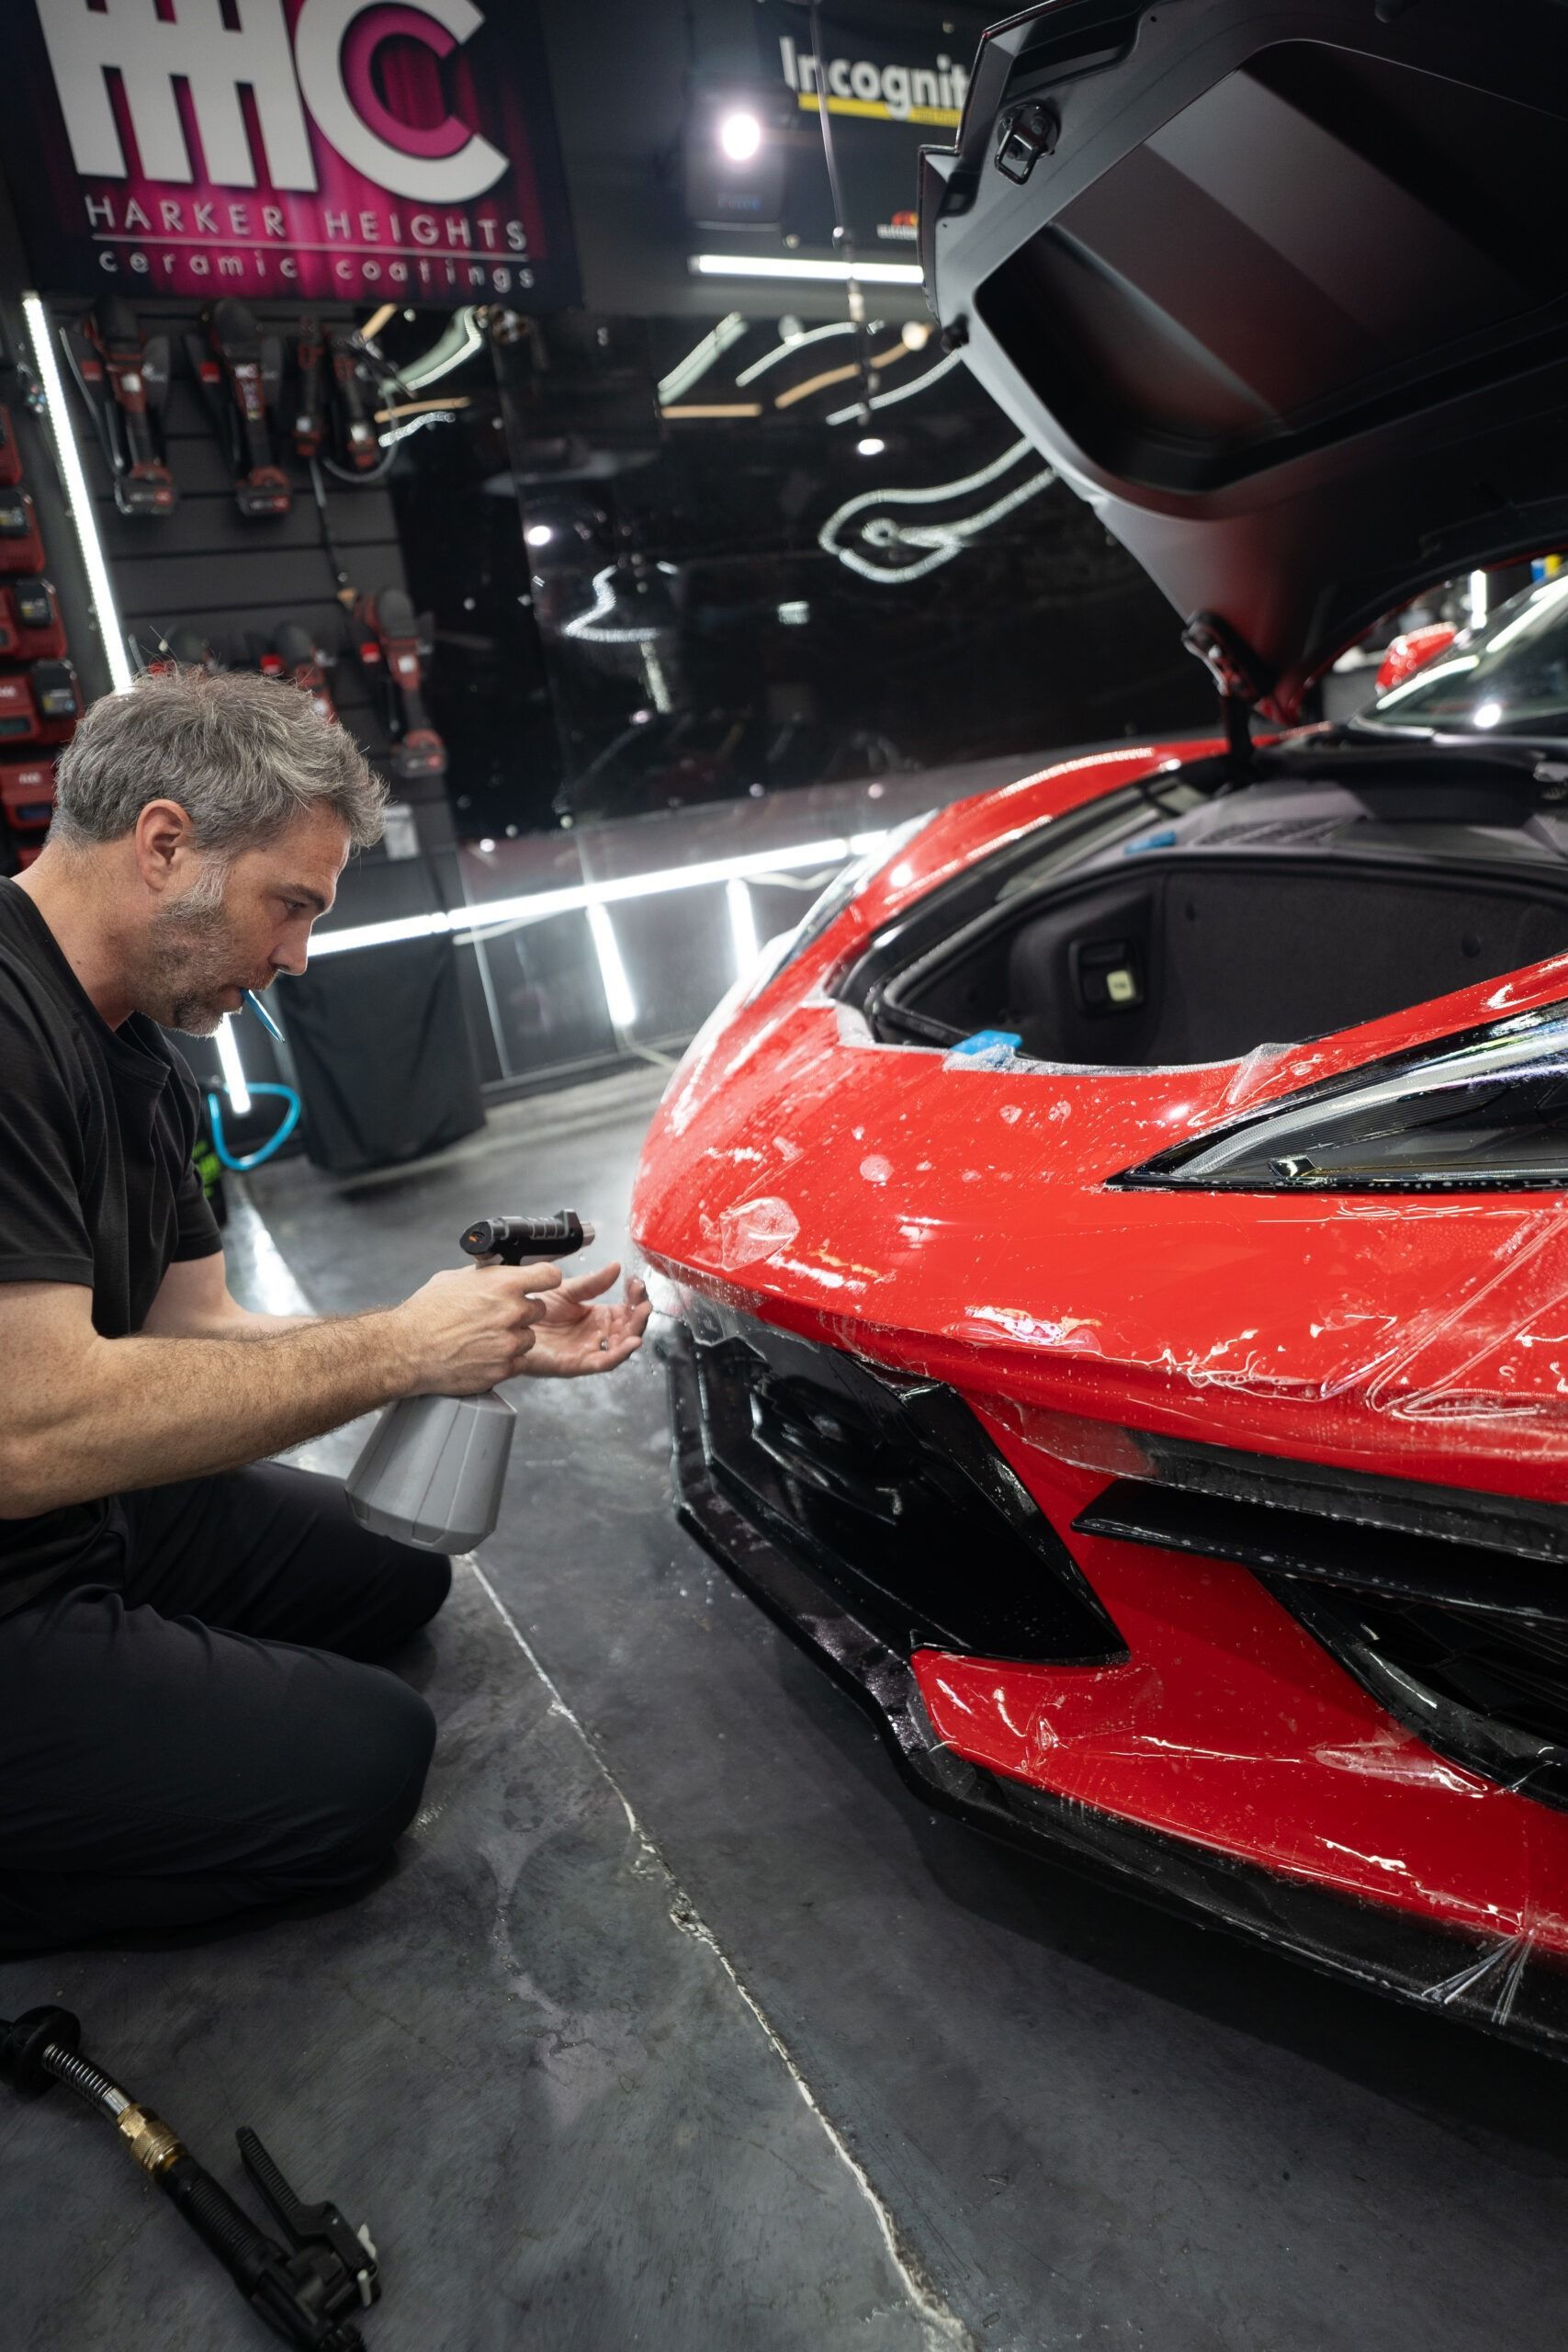 A man is kneeling down next to a red sports car.